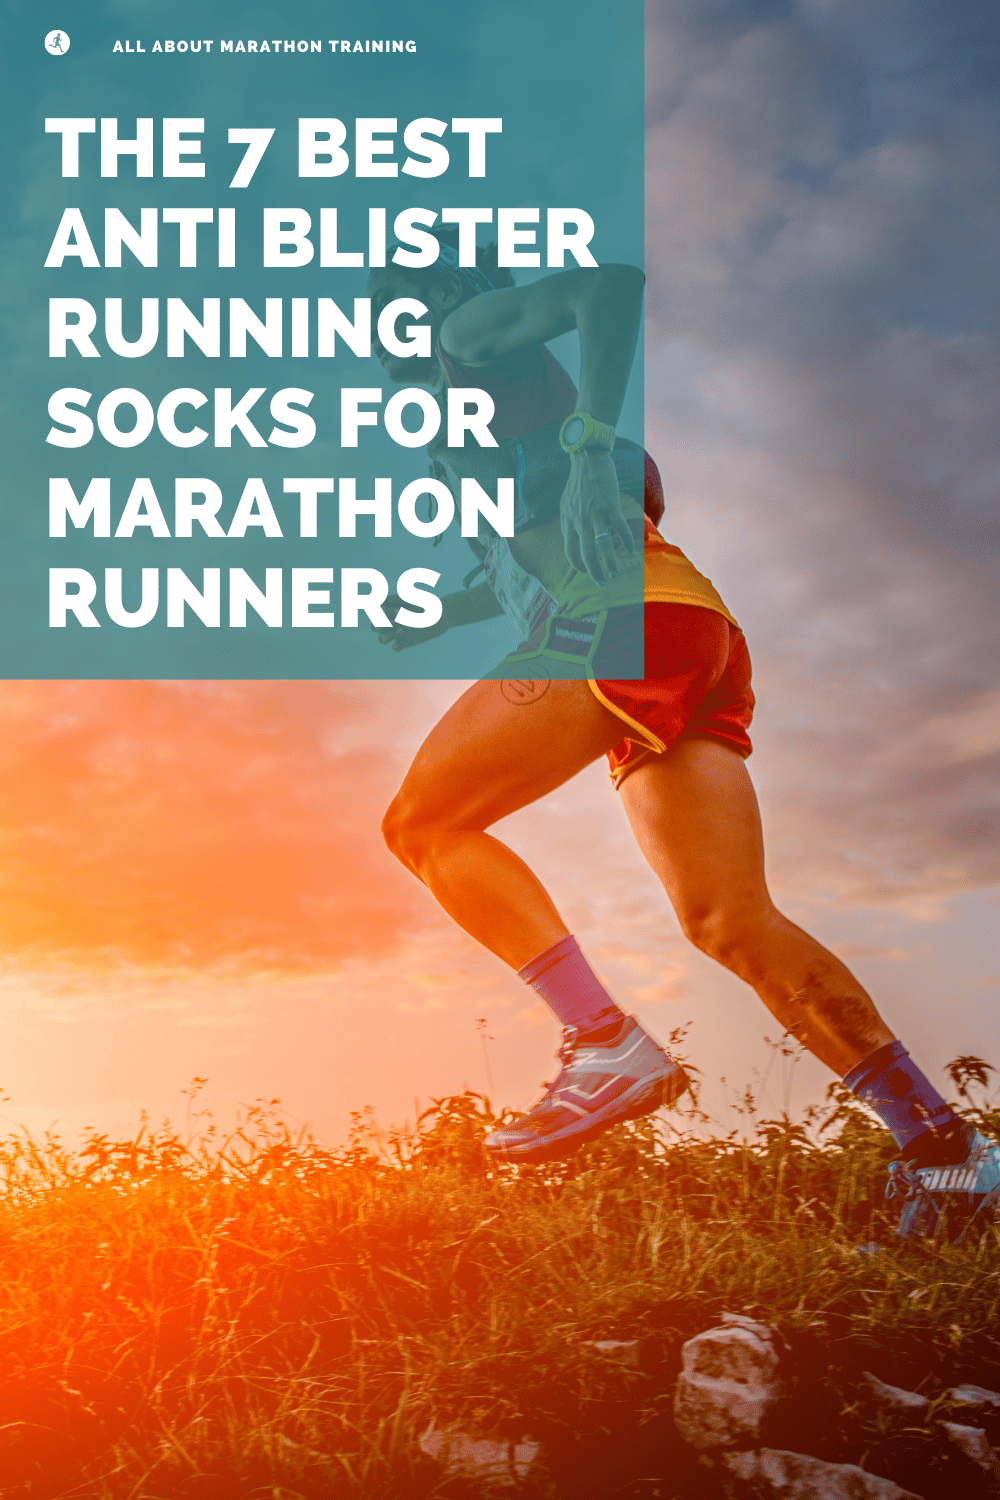 https://www.all-about-marathon-training.com/images/xBestAntiBlisterRunningSocksPIN.png.pagespeed.ic.th2ErPIw_L.png